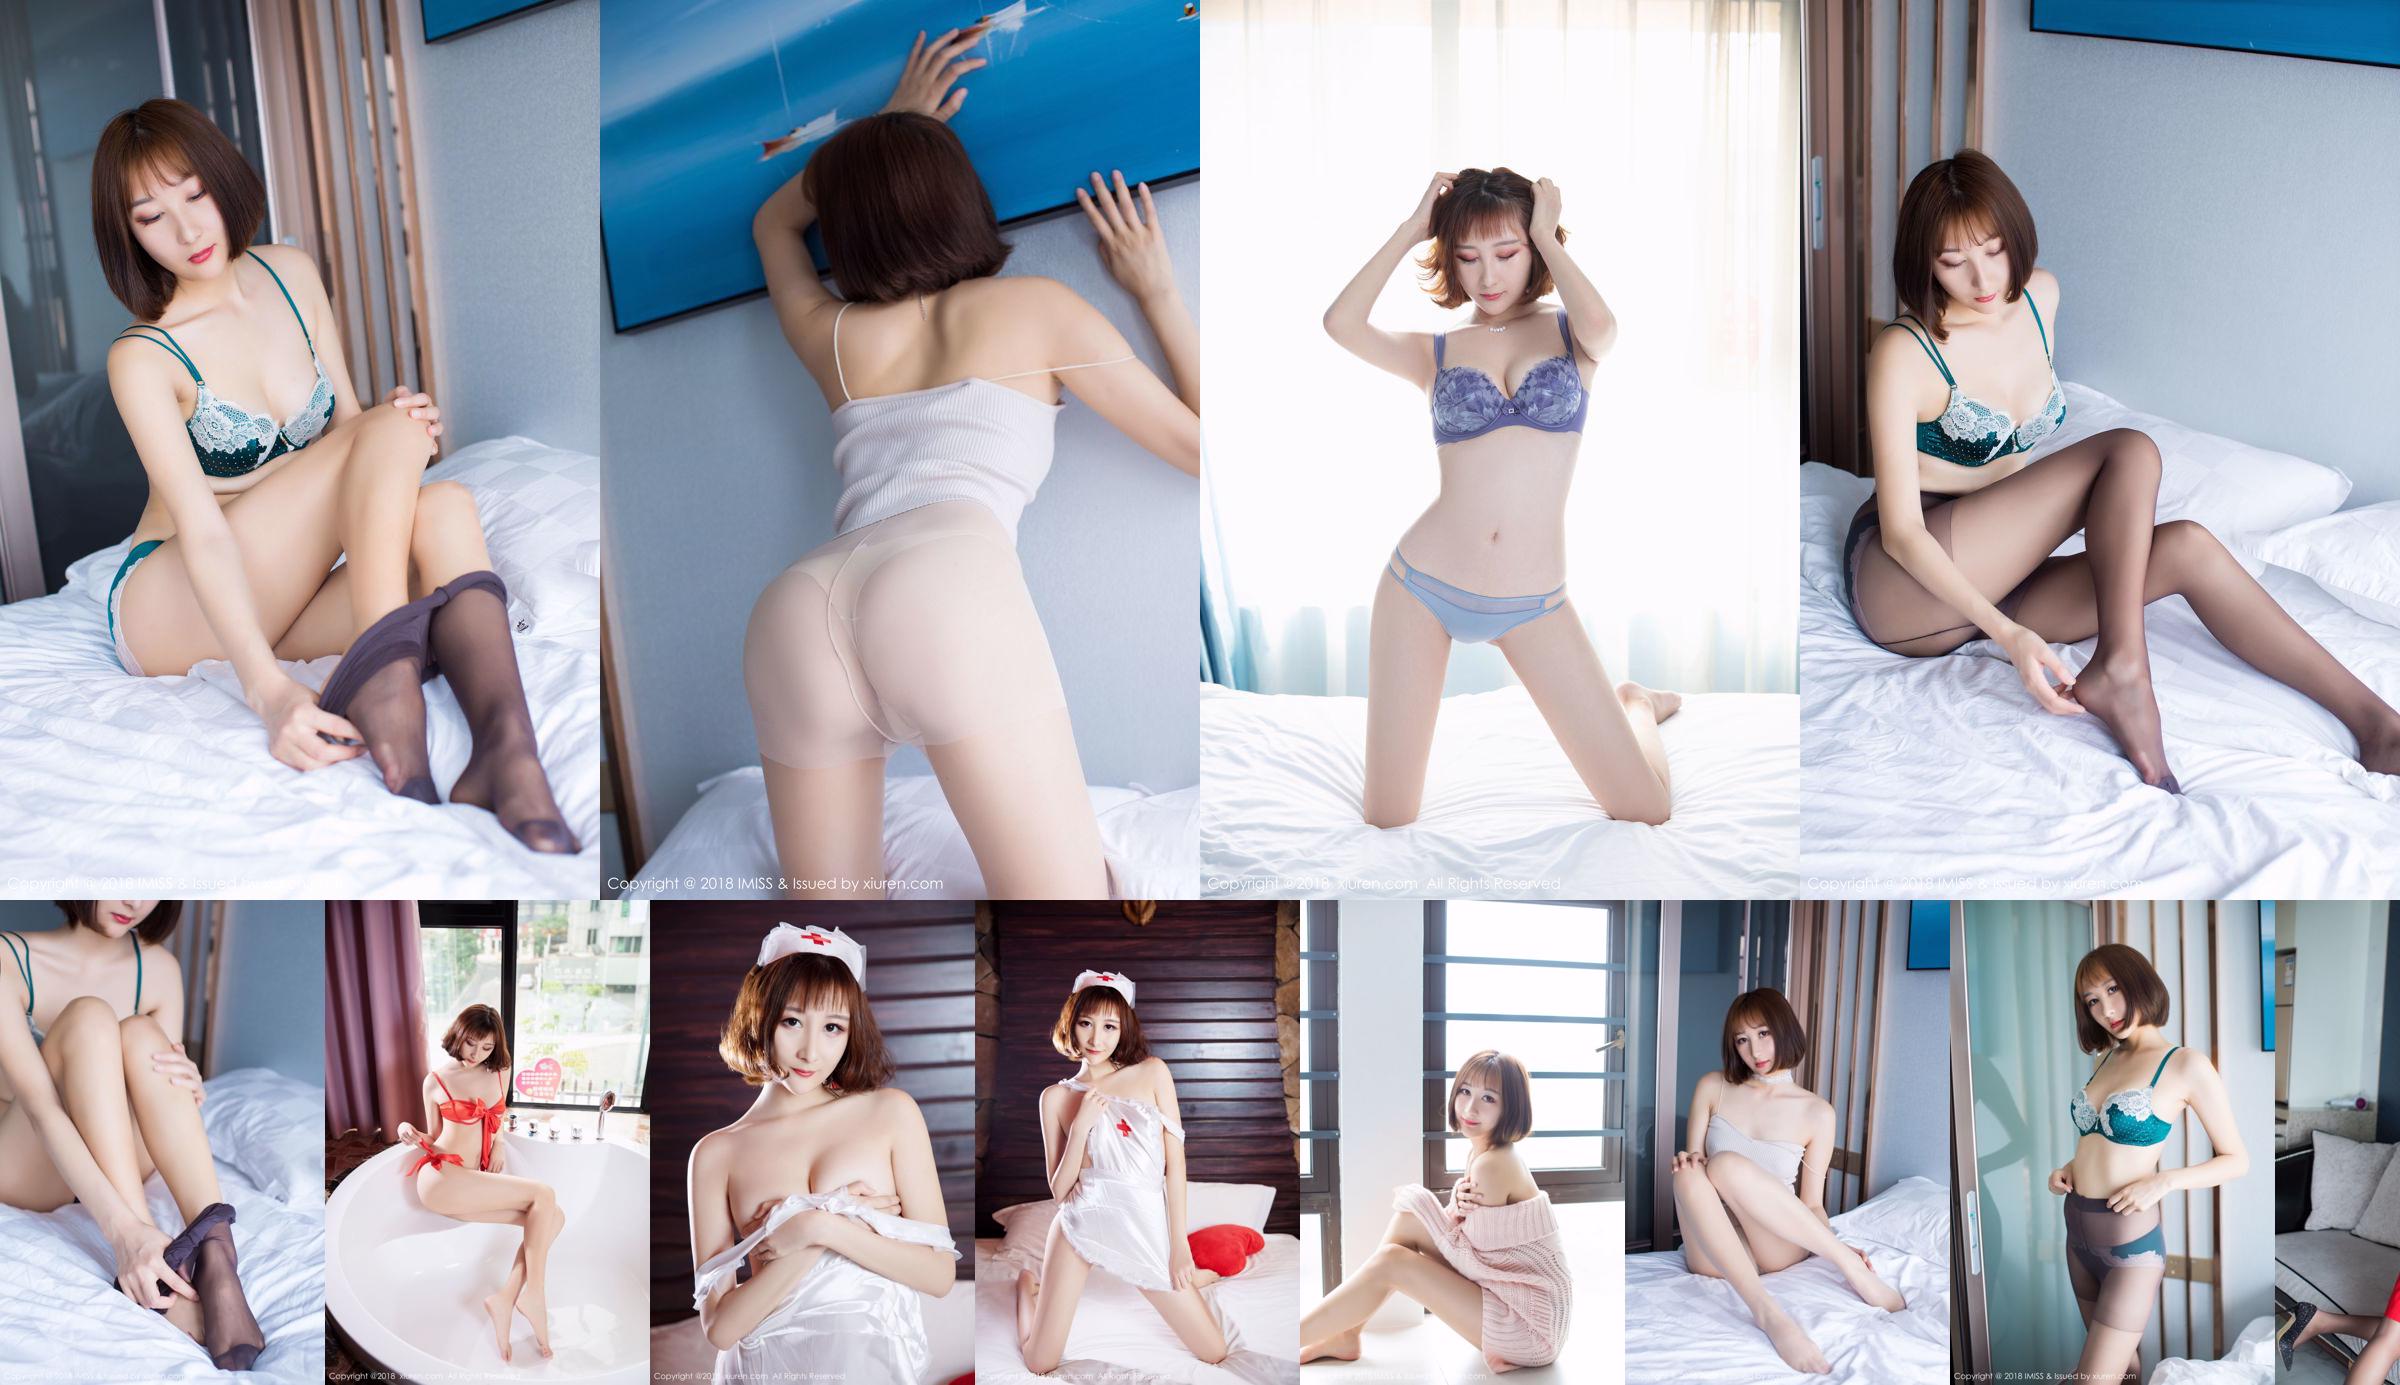 Model @九尾Ivy- "The Ultimate Private Charm" [秀人XIUREN] No.1046 No.c3f096 Page 25